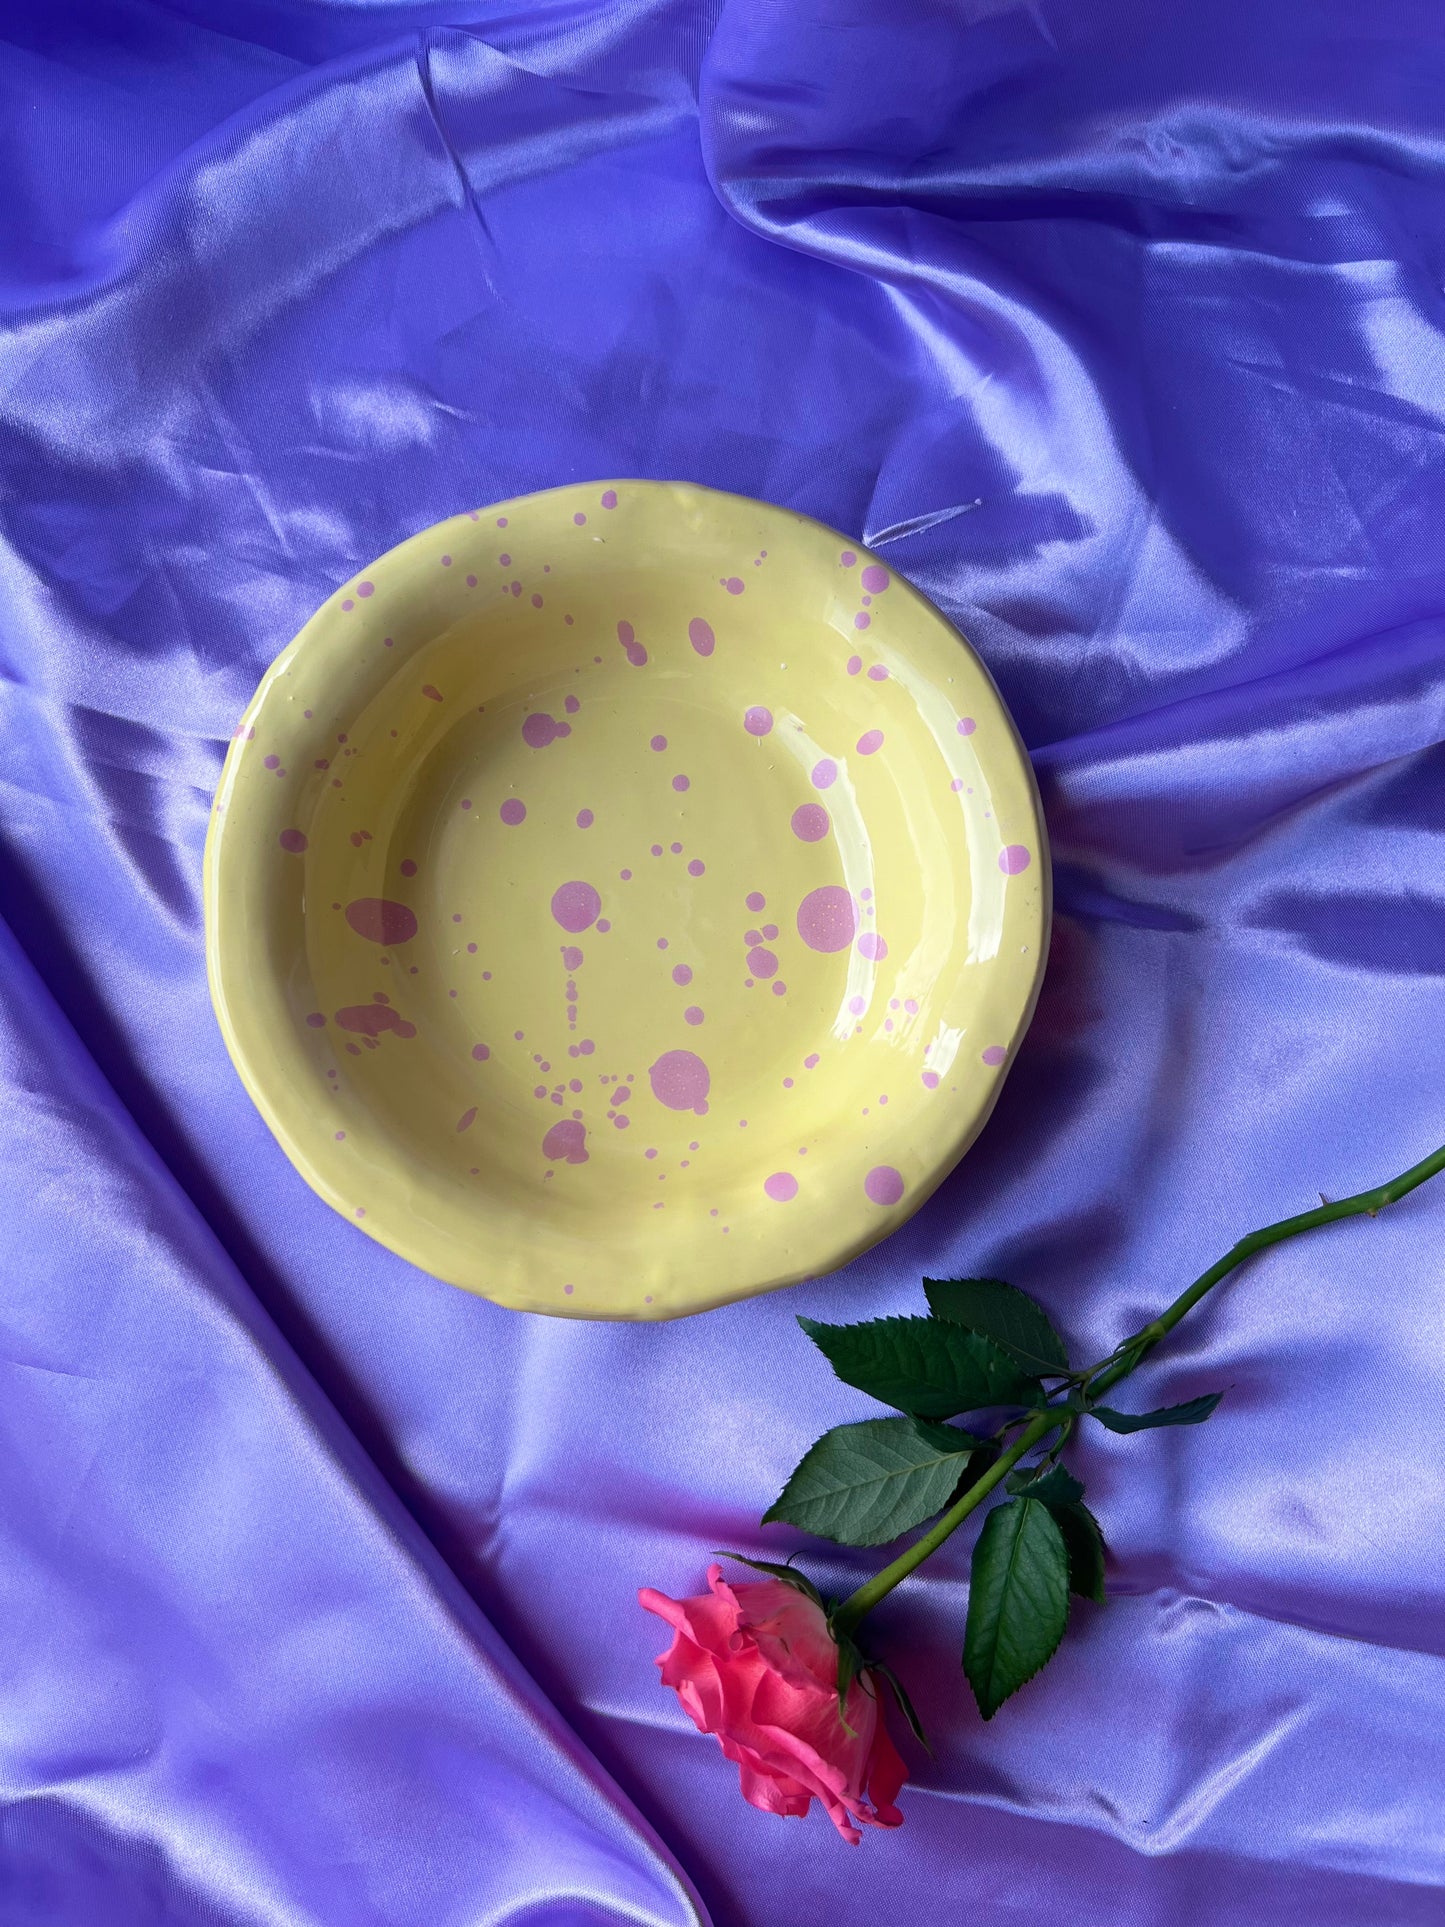 Spotted bowl - Yellow & Pink